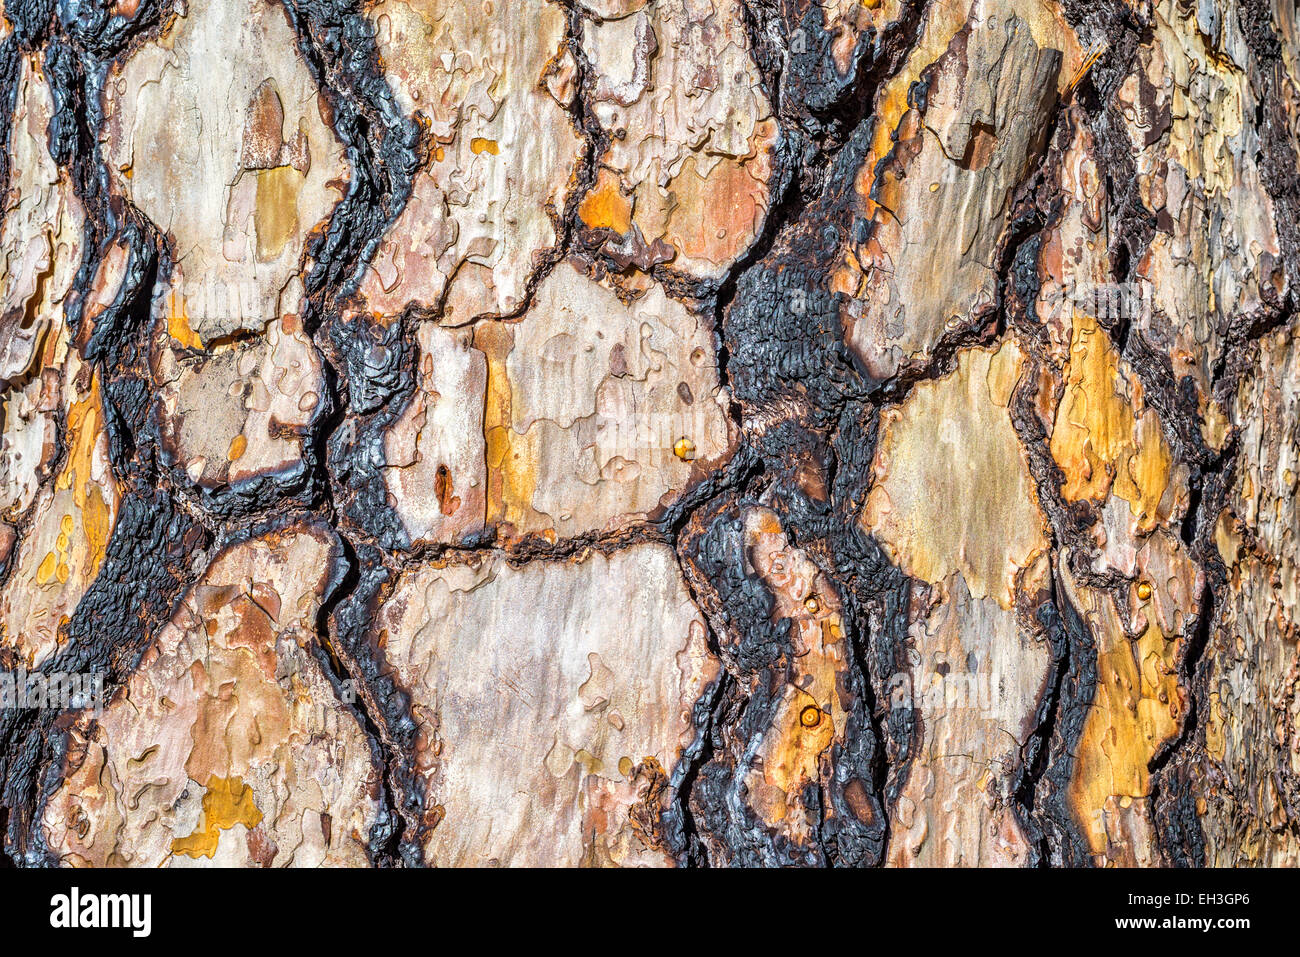 Jigsaw pattern formed on a pine tree trunk. Stock Photo